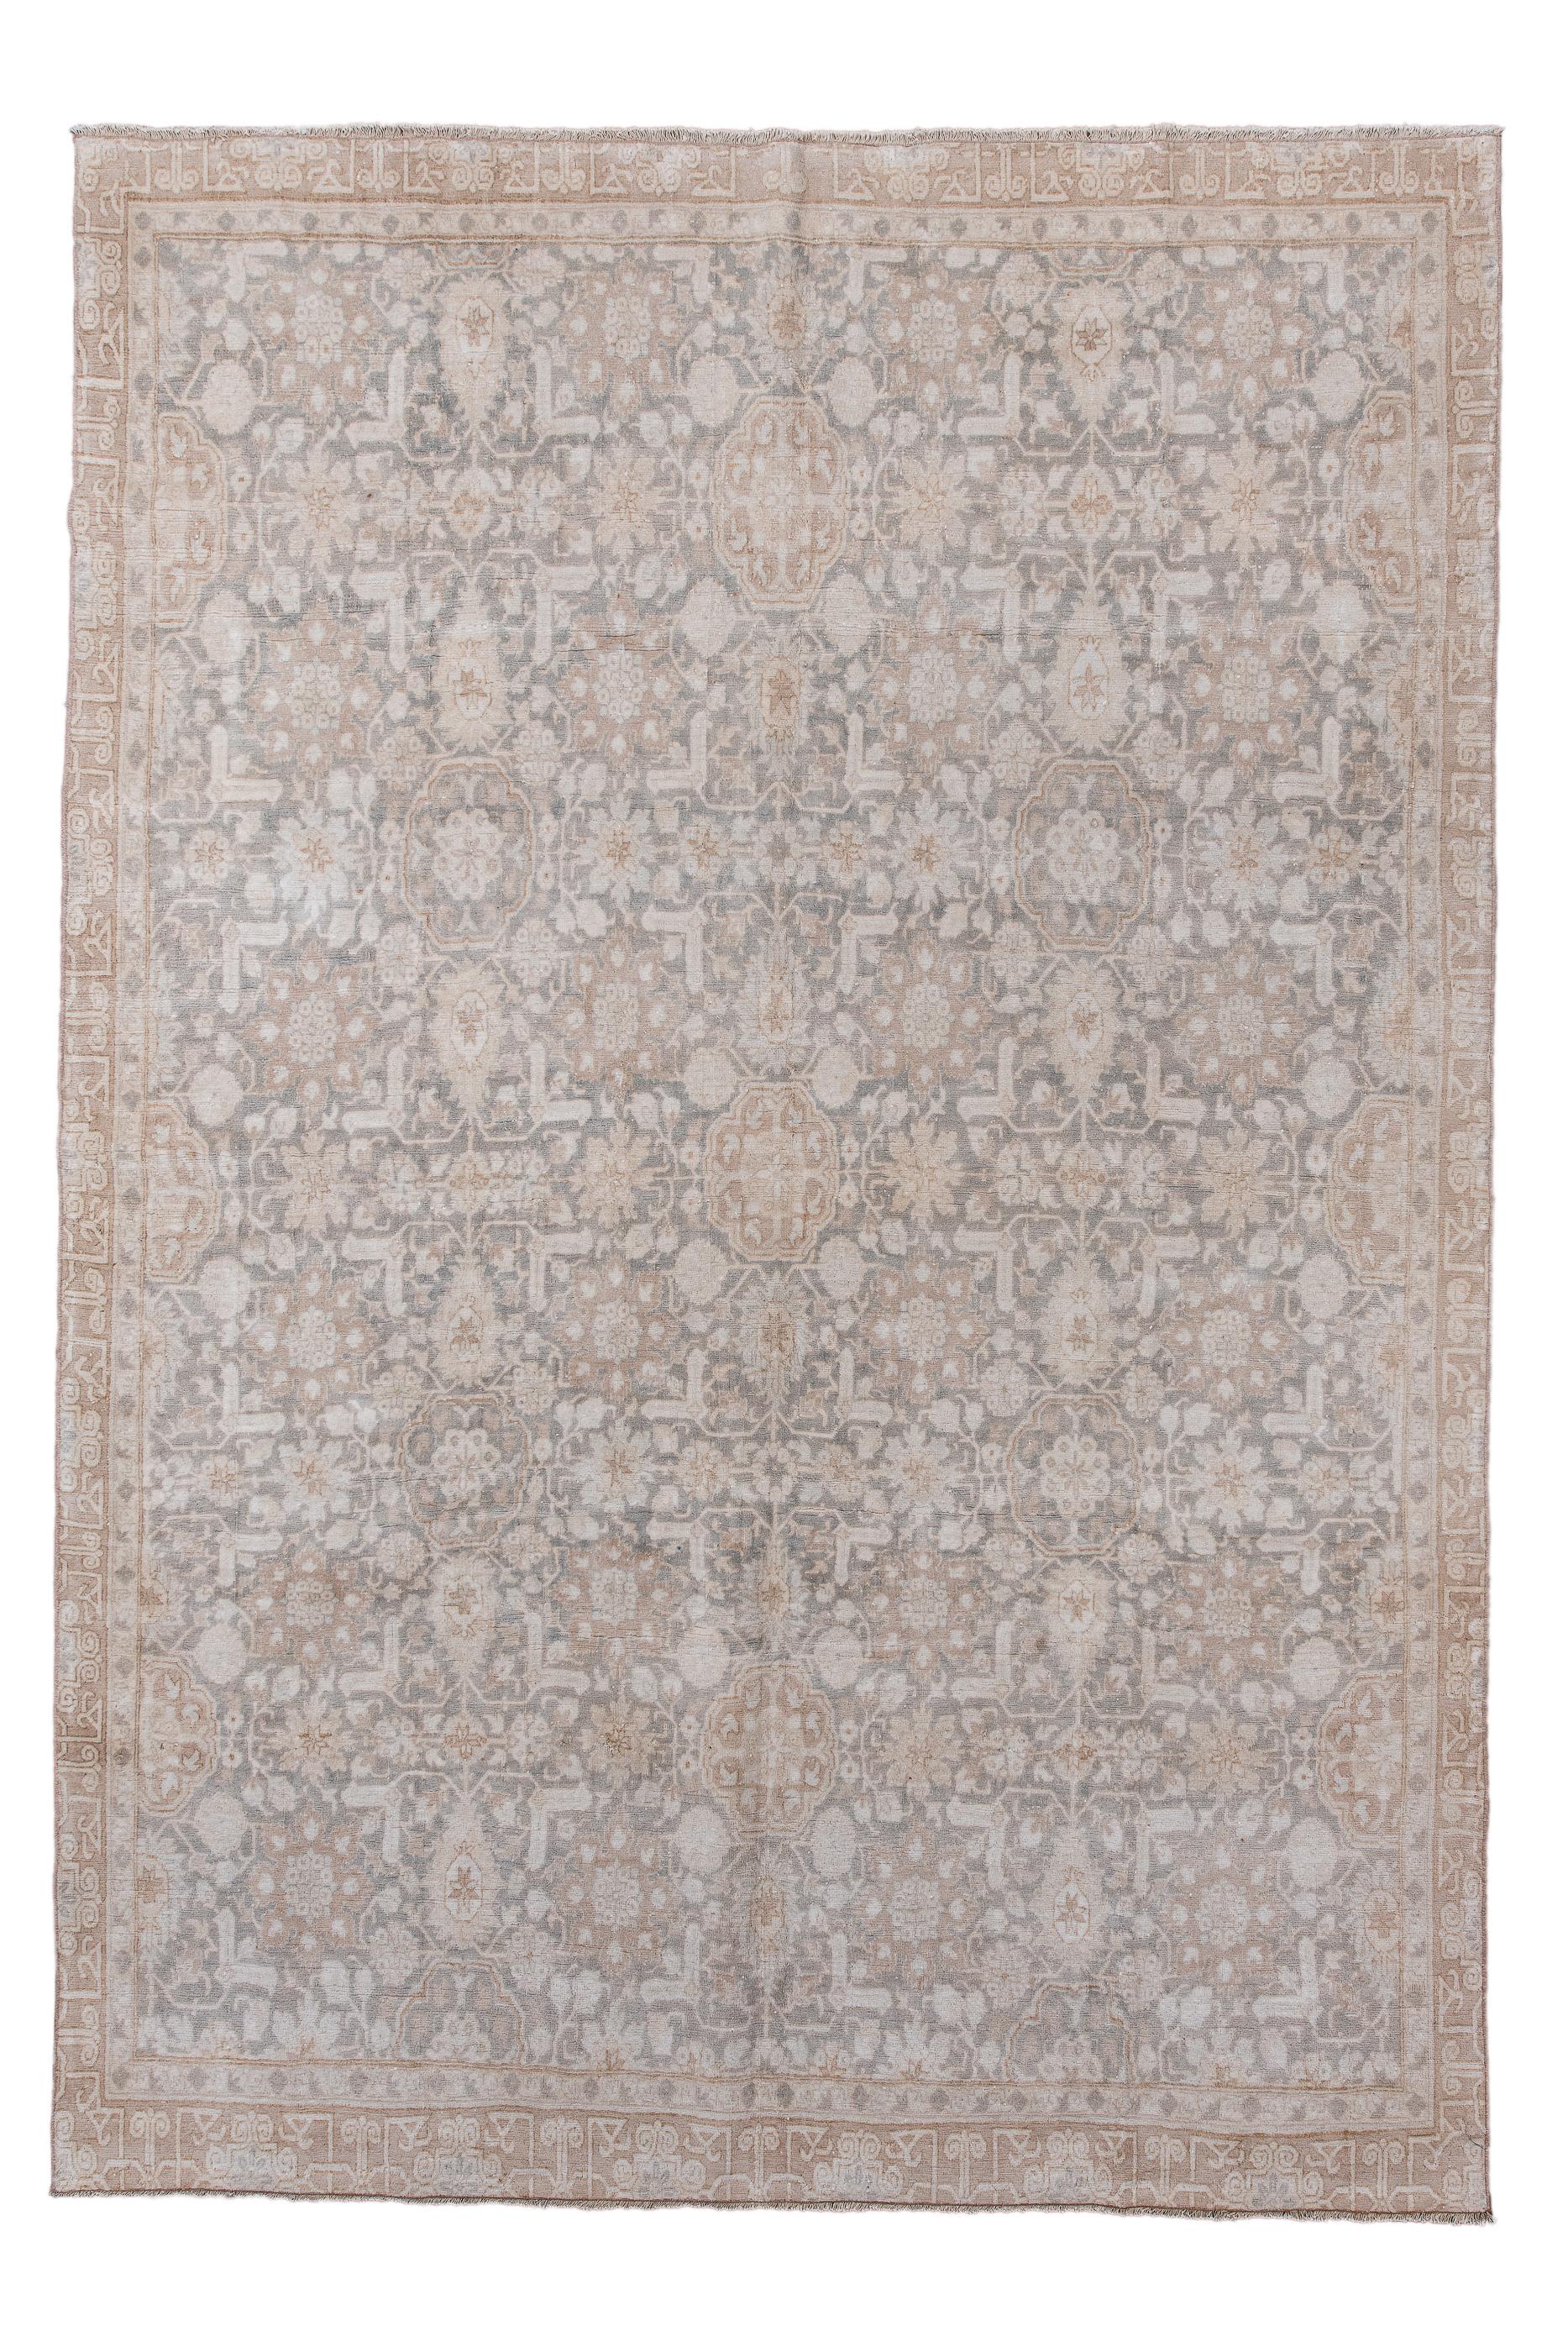 This well-woven Anatolian large scatter shows a slate field evenly overlaid by an Avshan allover design  of forked “goosenecks”, rosettes, elongated ragged palmettes,  stars, stems and florets.  Originally northern Persian, the pattern has been